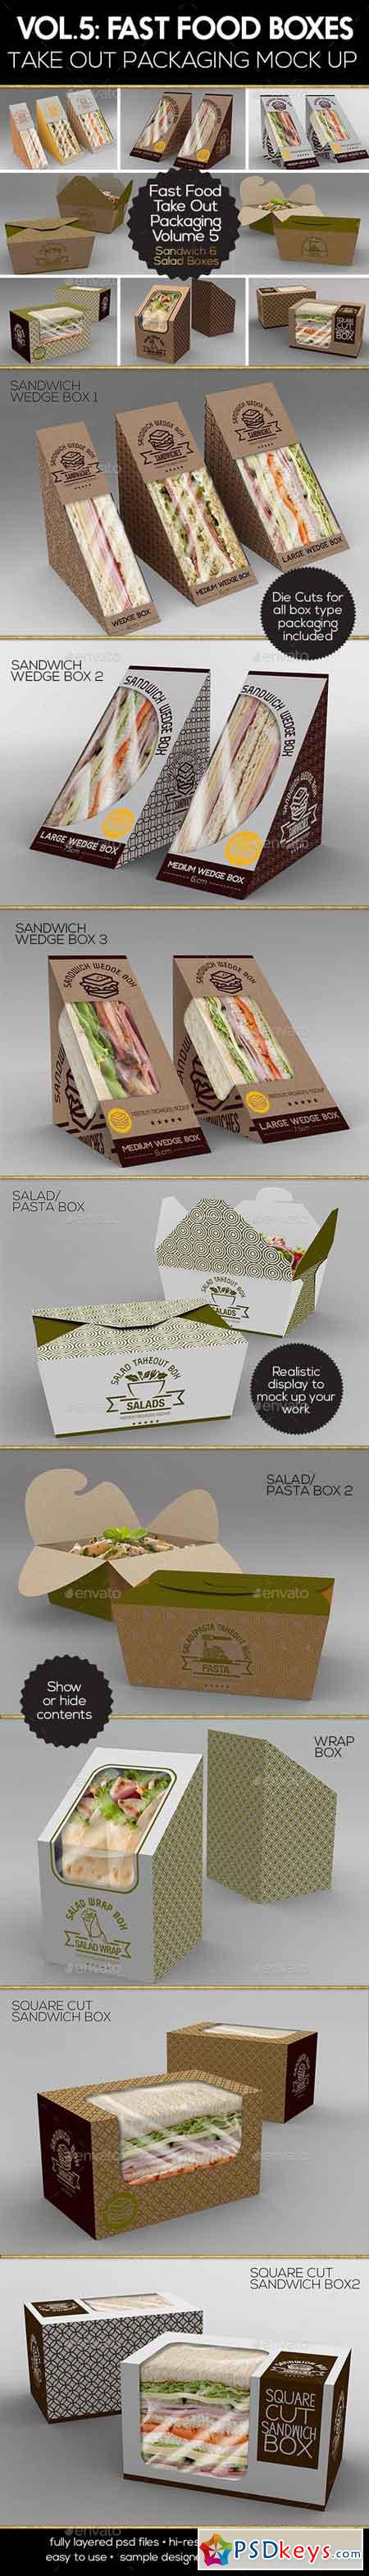 Download Fast Food Boxes Vol.5 Take Out Packaging Mock Ups 18337613 » Free Download Photoshop Vector ...